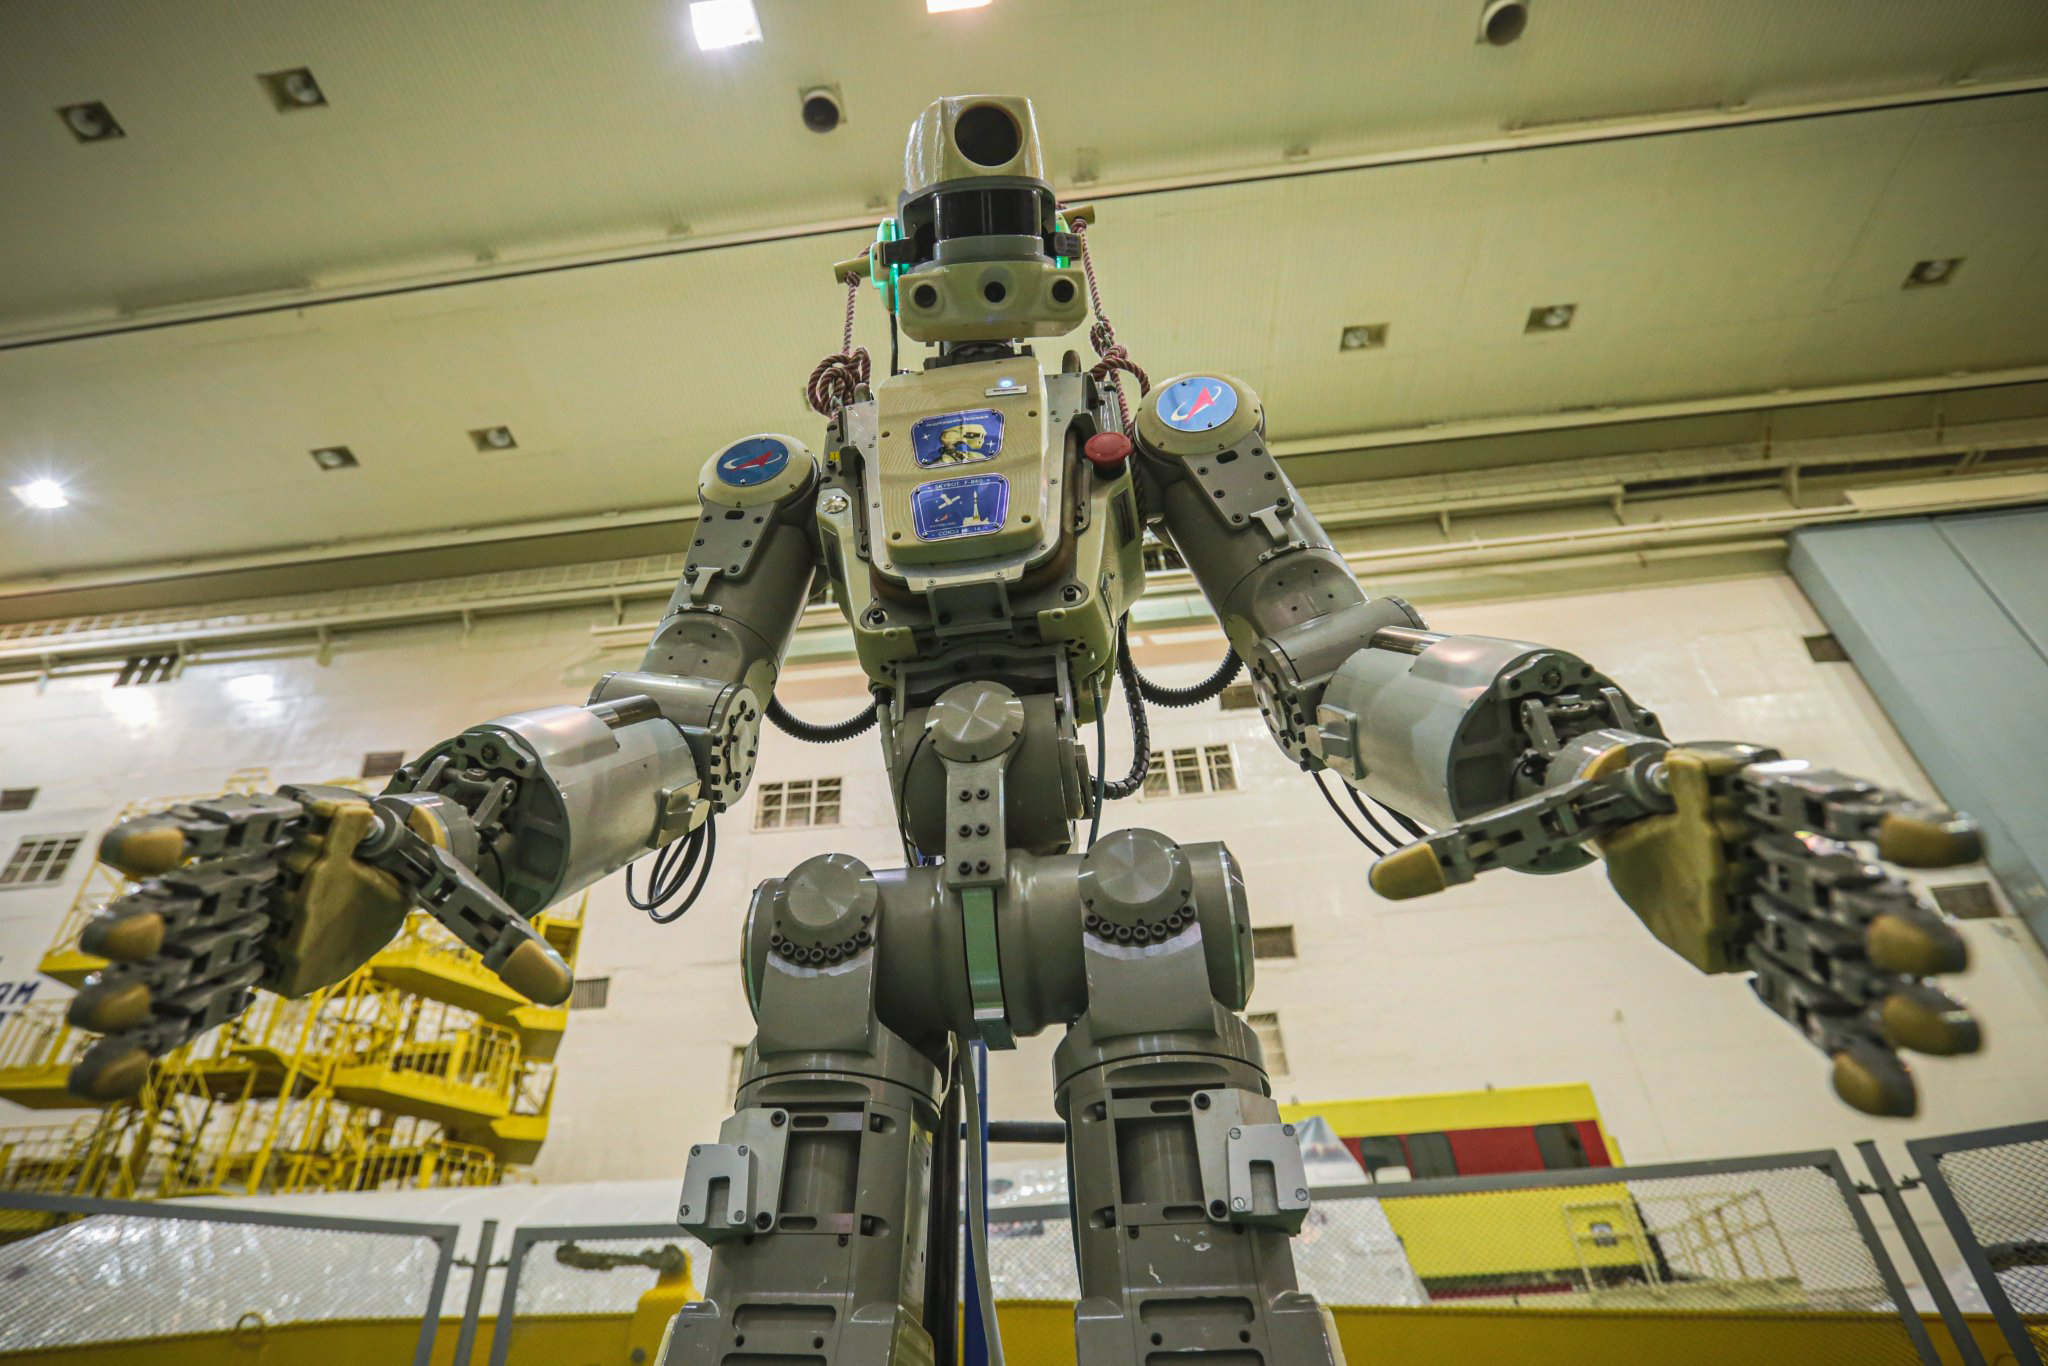 Meet Skybot F850, the Humanoid Robot Russia Is Launching into Space